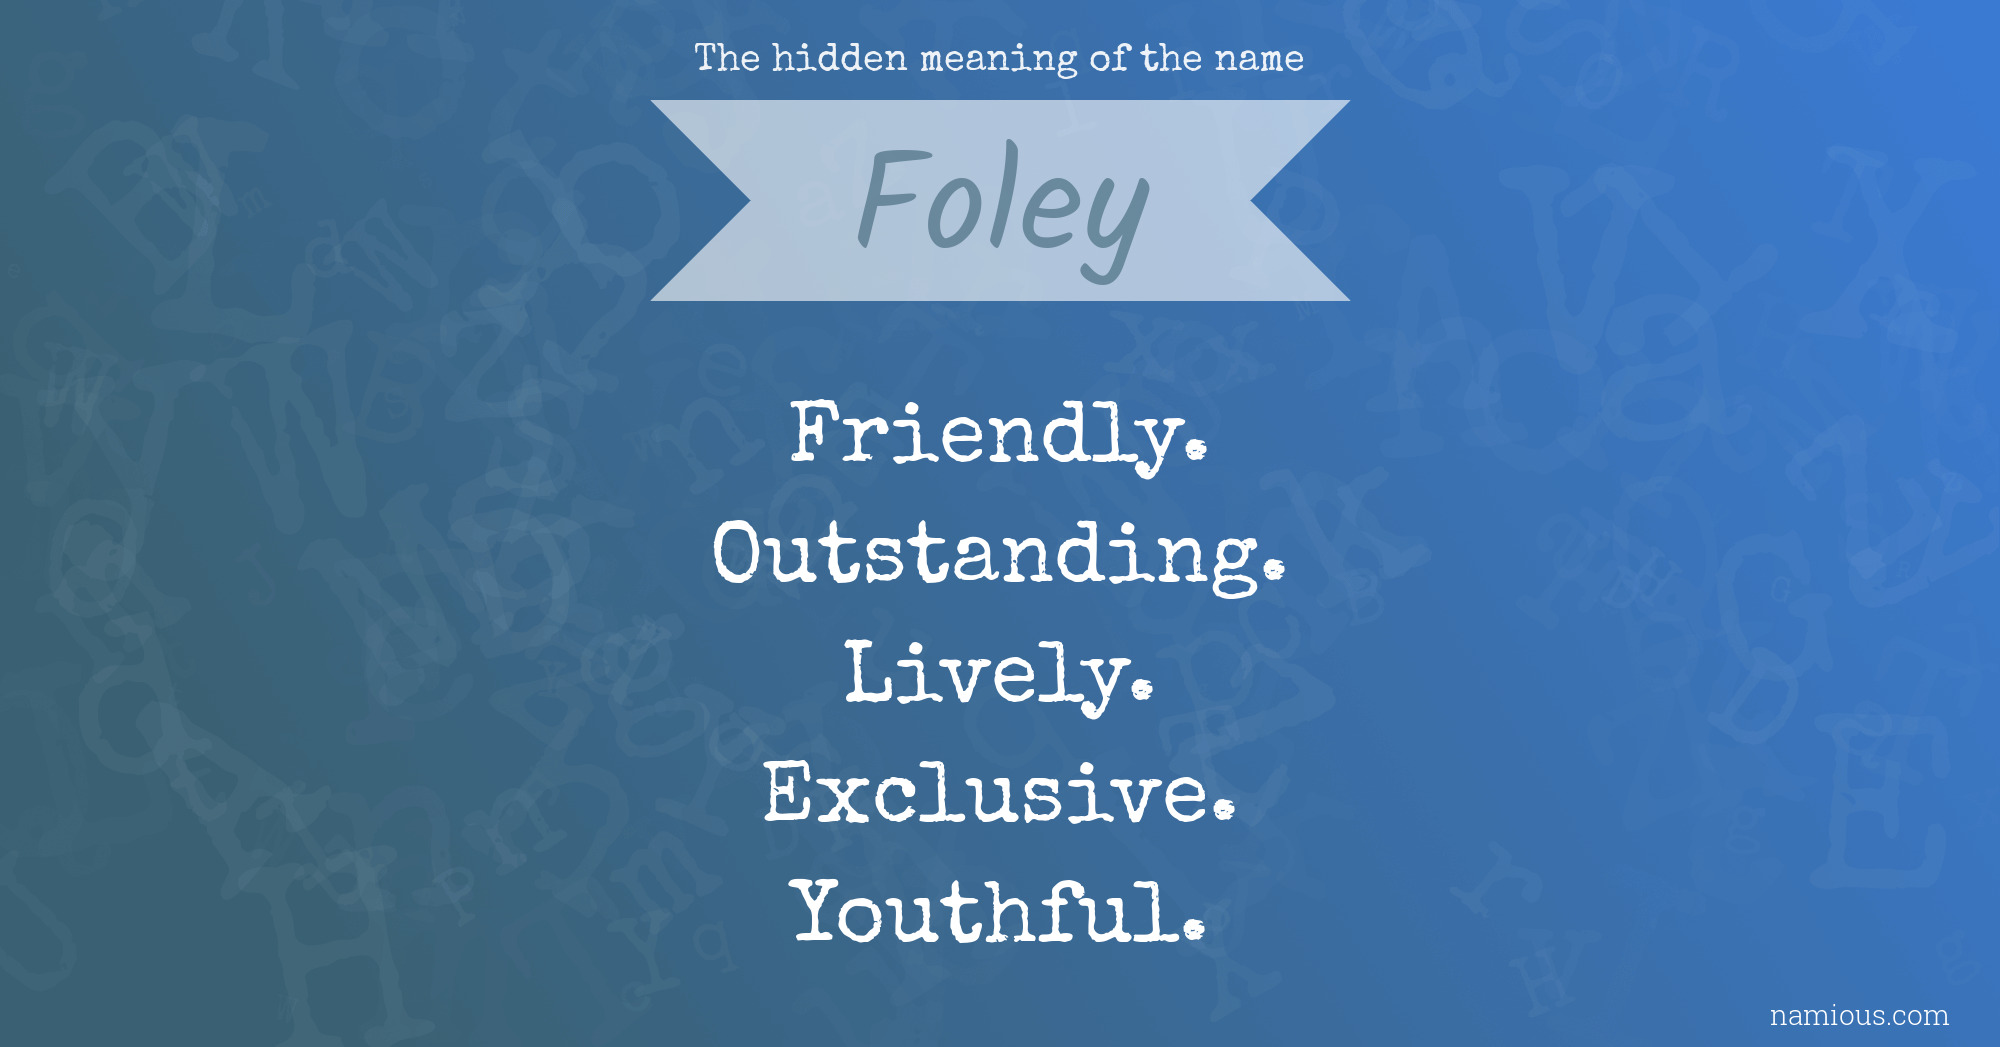 The hidden meaning of the name Foley